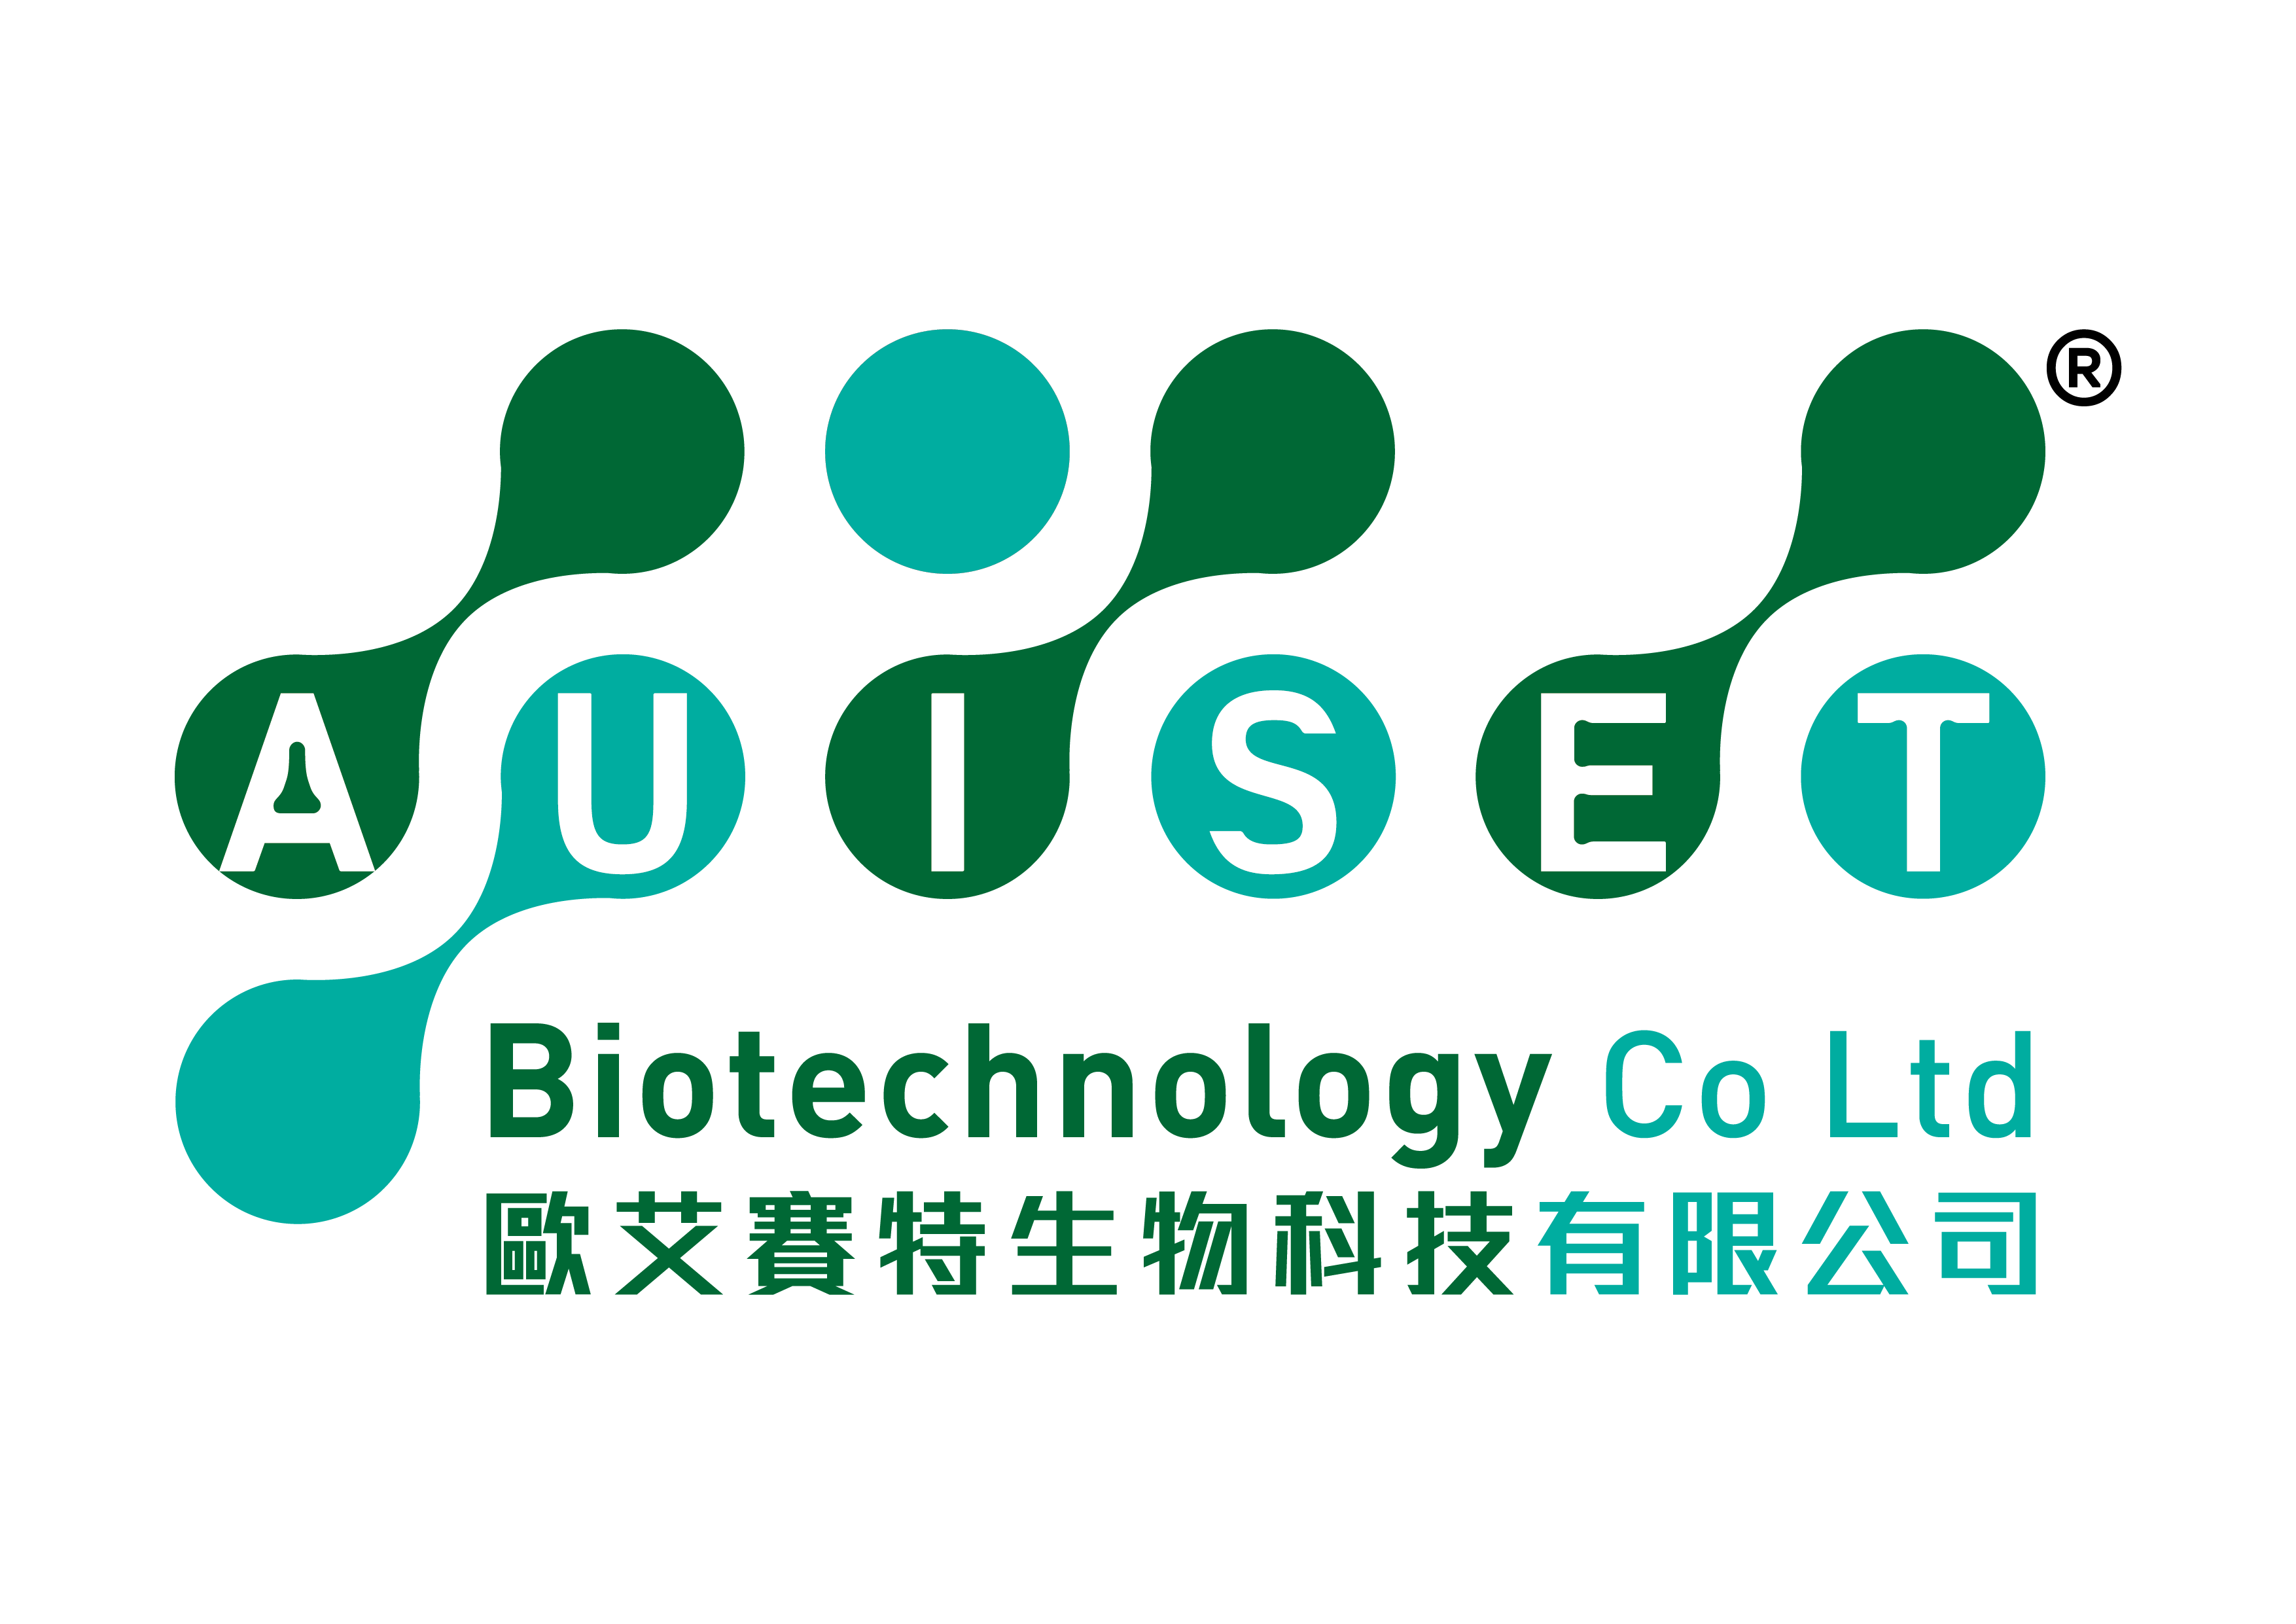 AUISET Biotechnology Company Limited